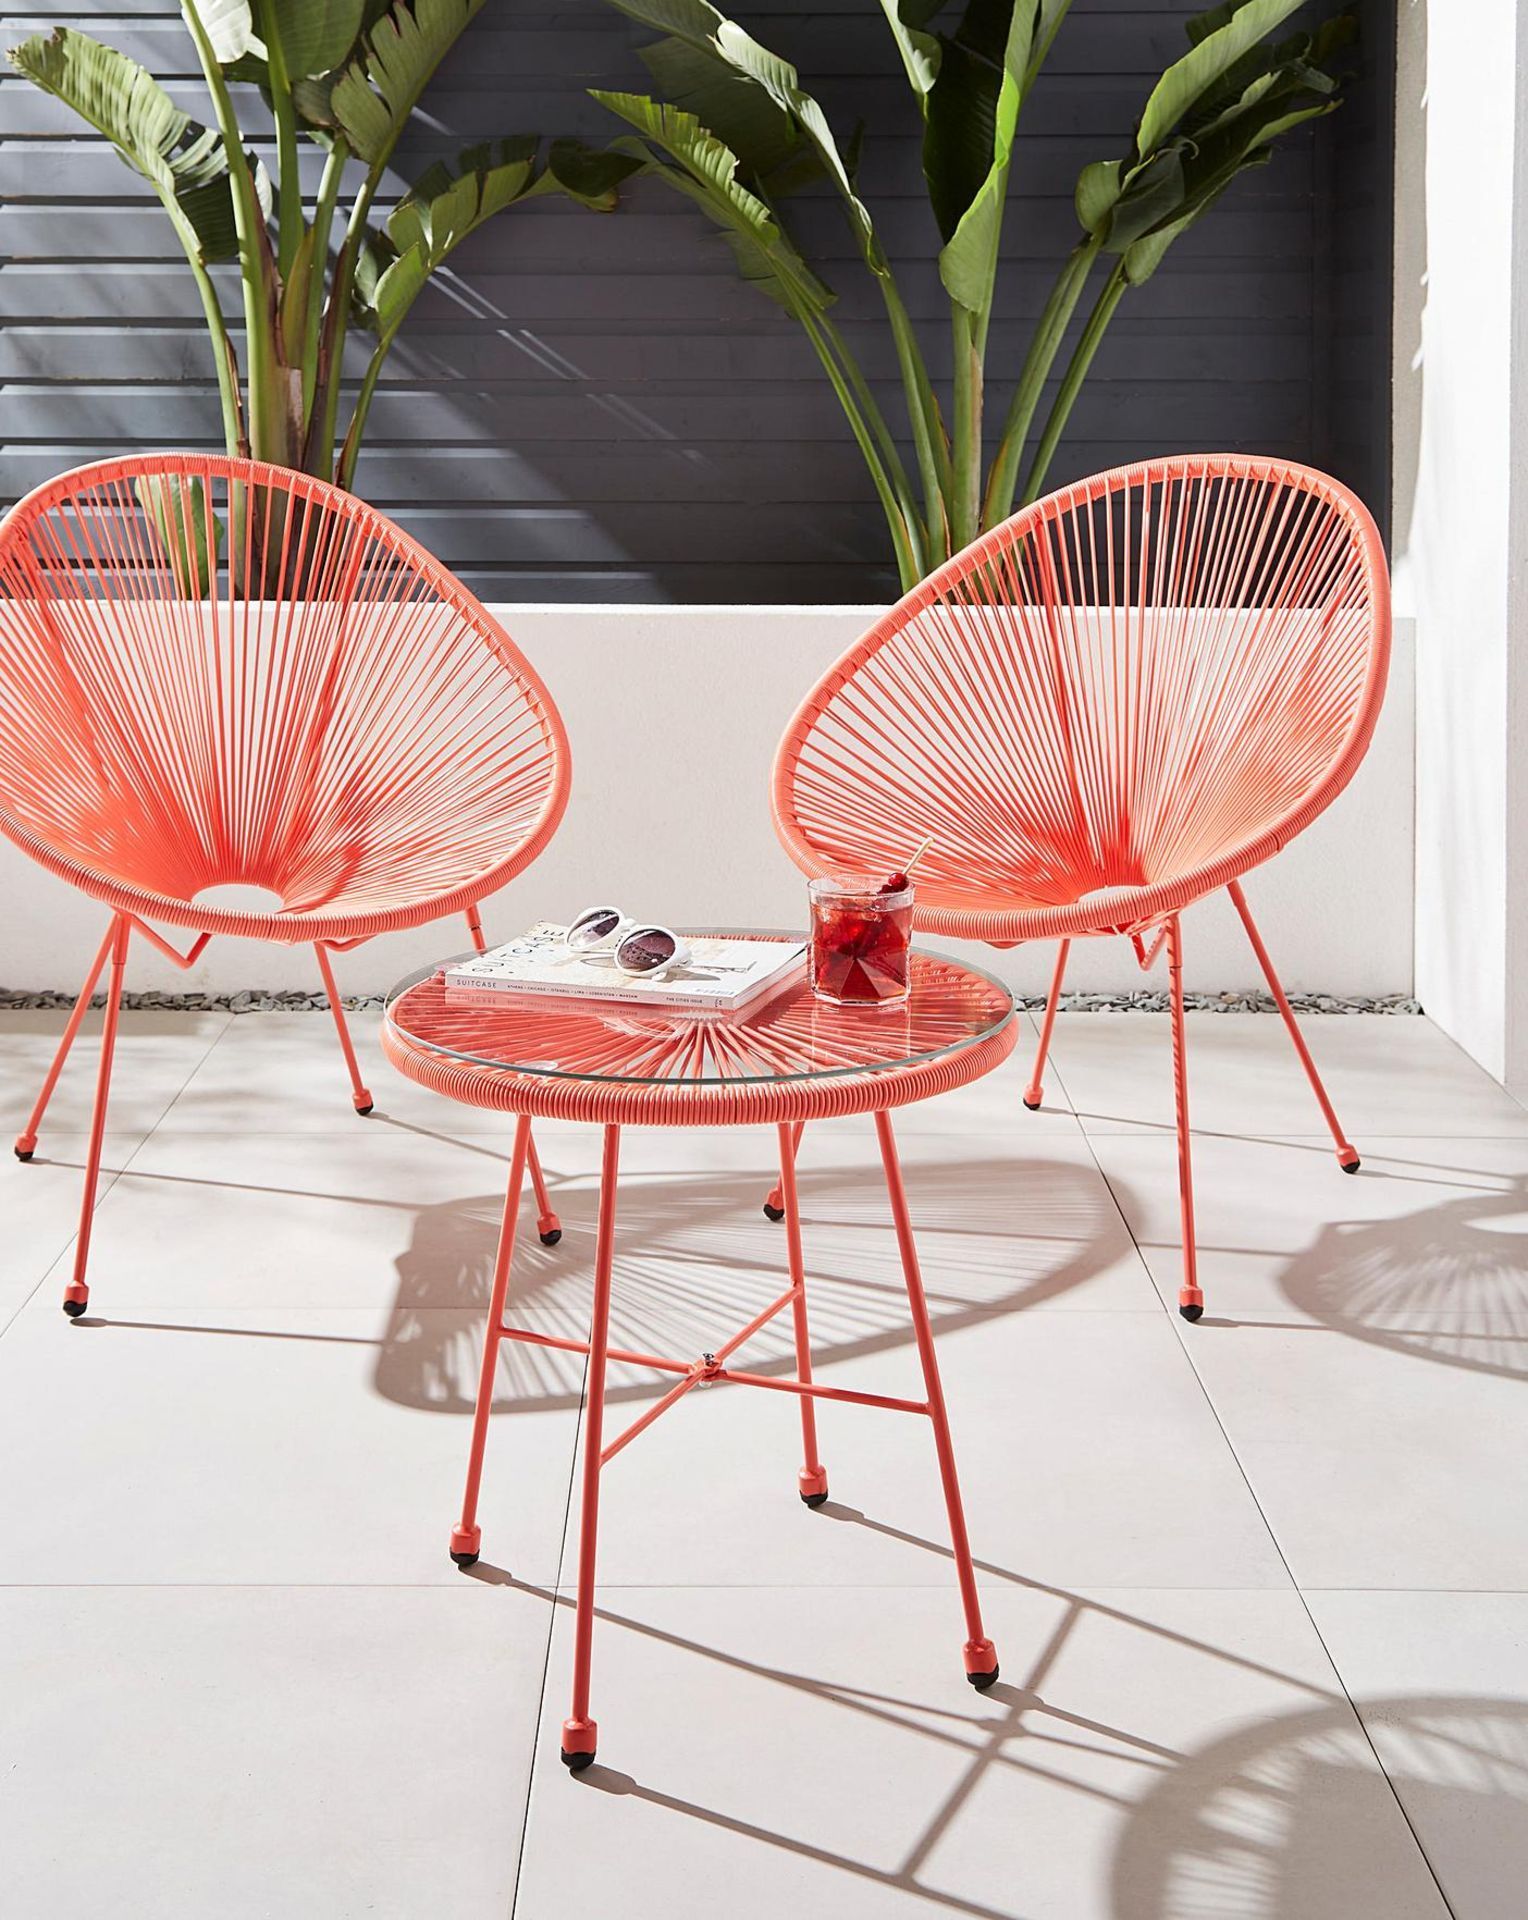 New & Boxed Salsa Bistro Lounge Set (CORAL). RRP £349.99. The Salsa Bistro Lounge Set complete